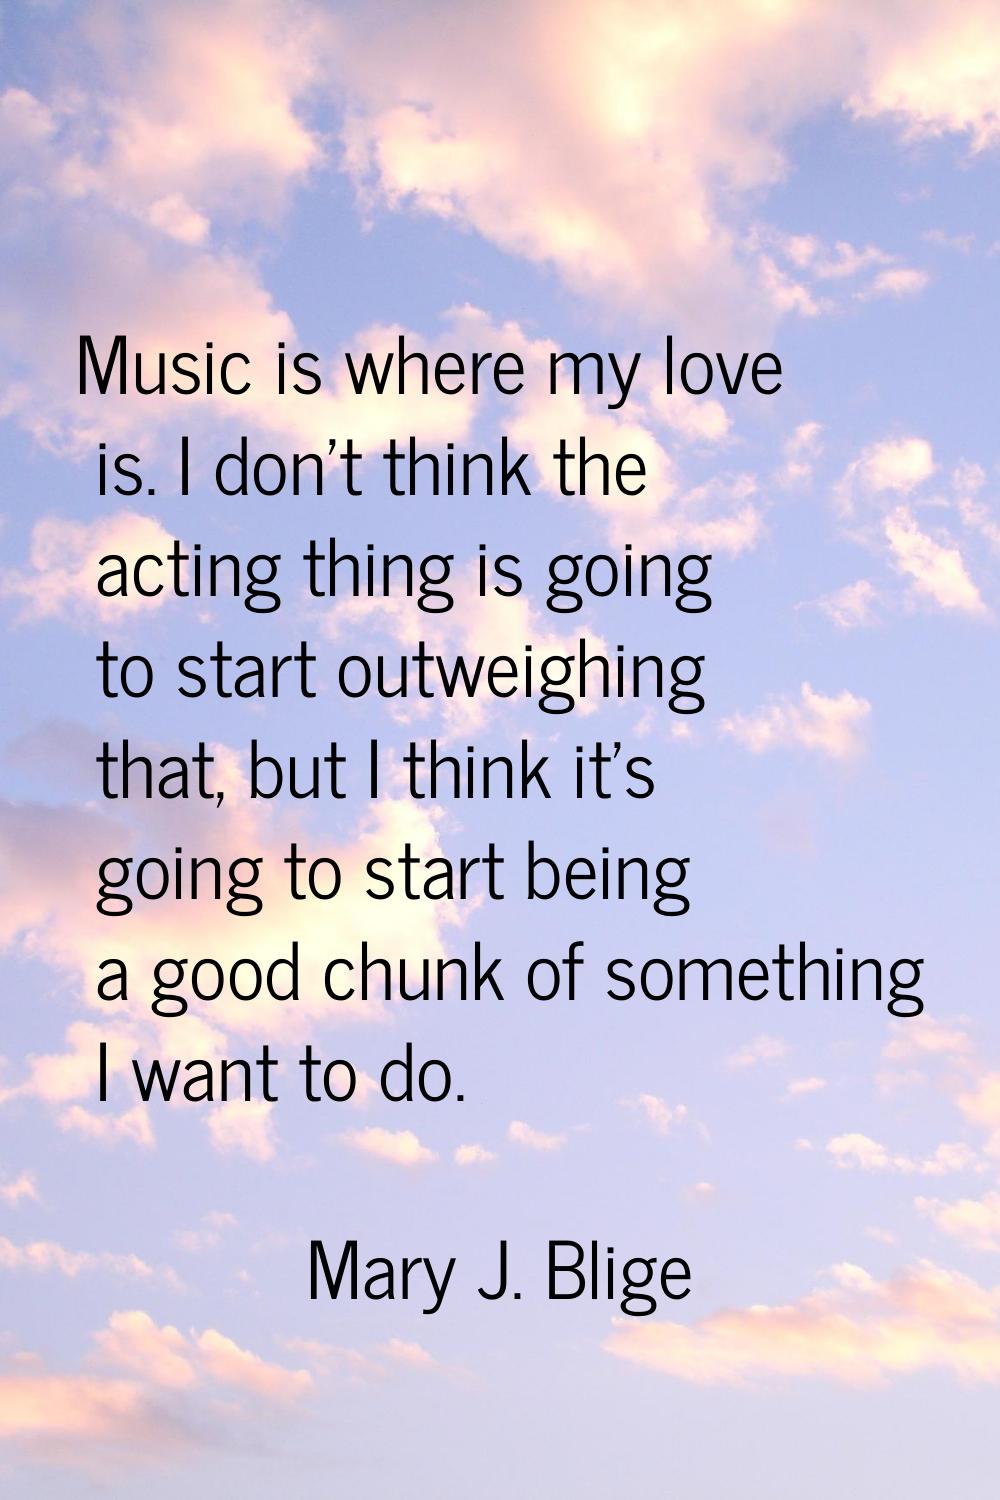 Music is where my love is. I don't think the acting thing is going to start outweighing that, but I